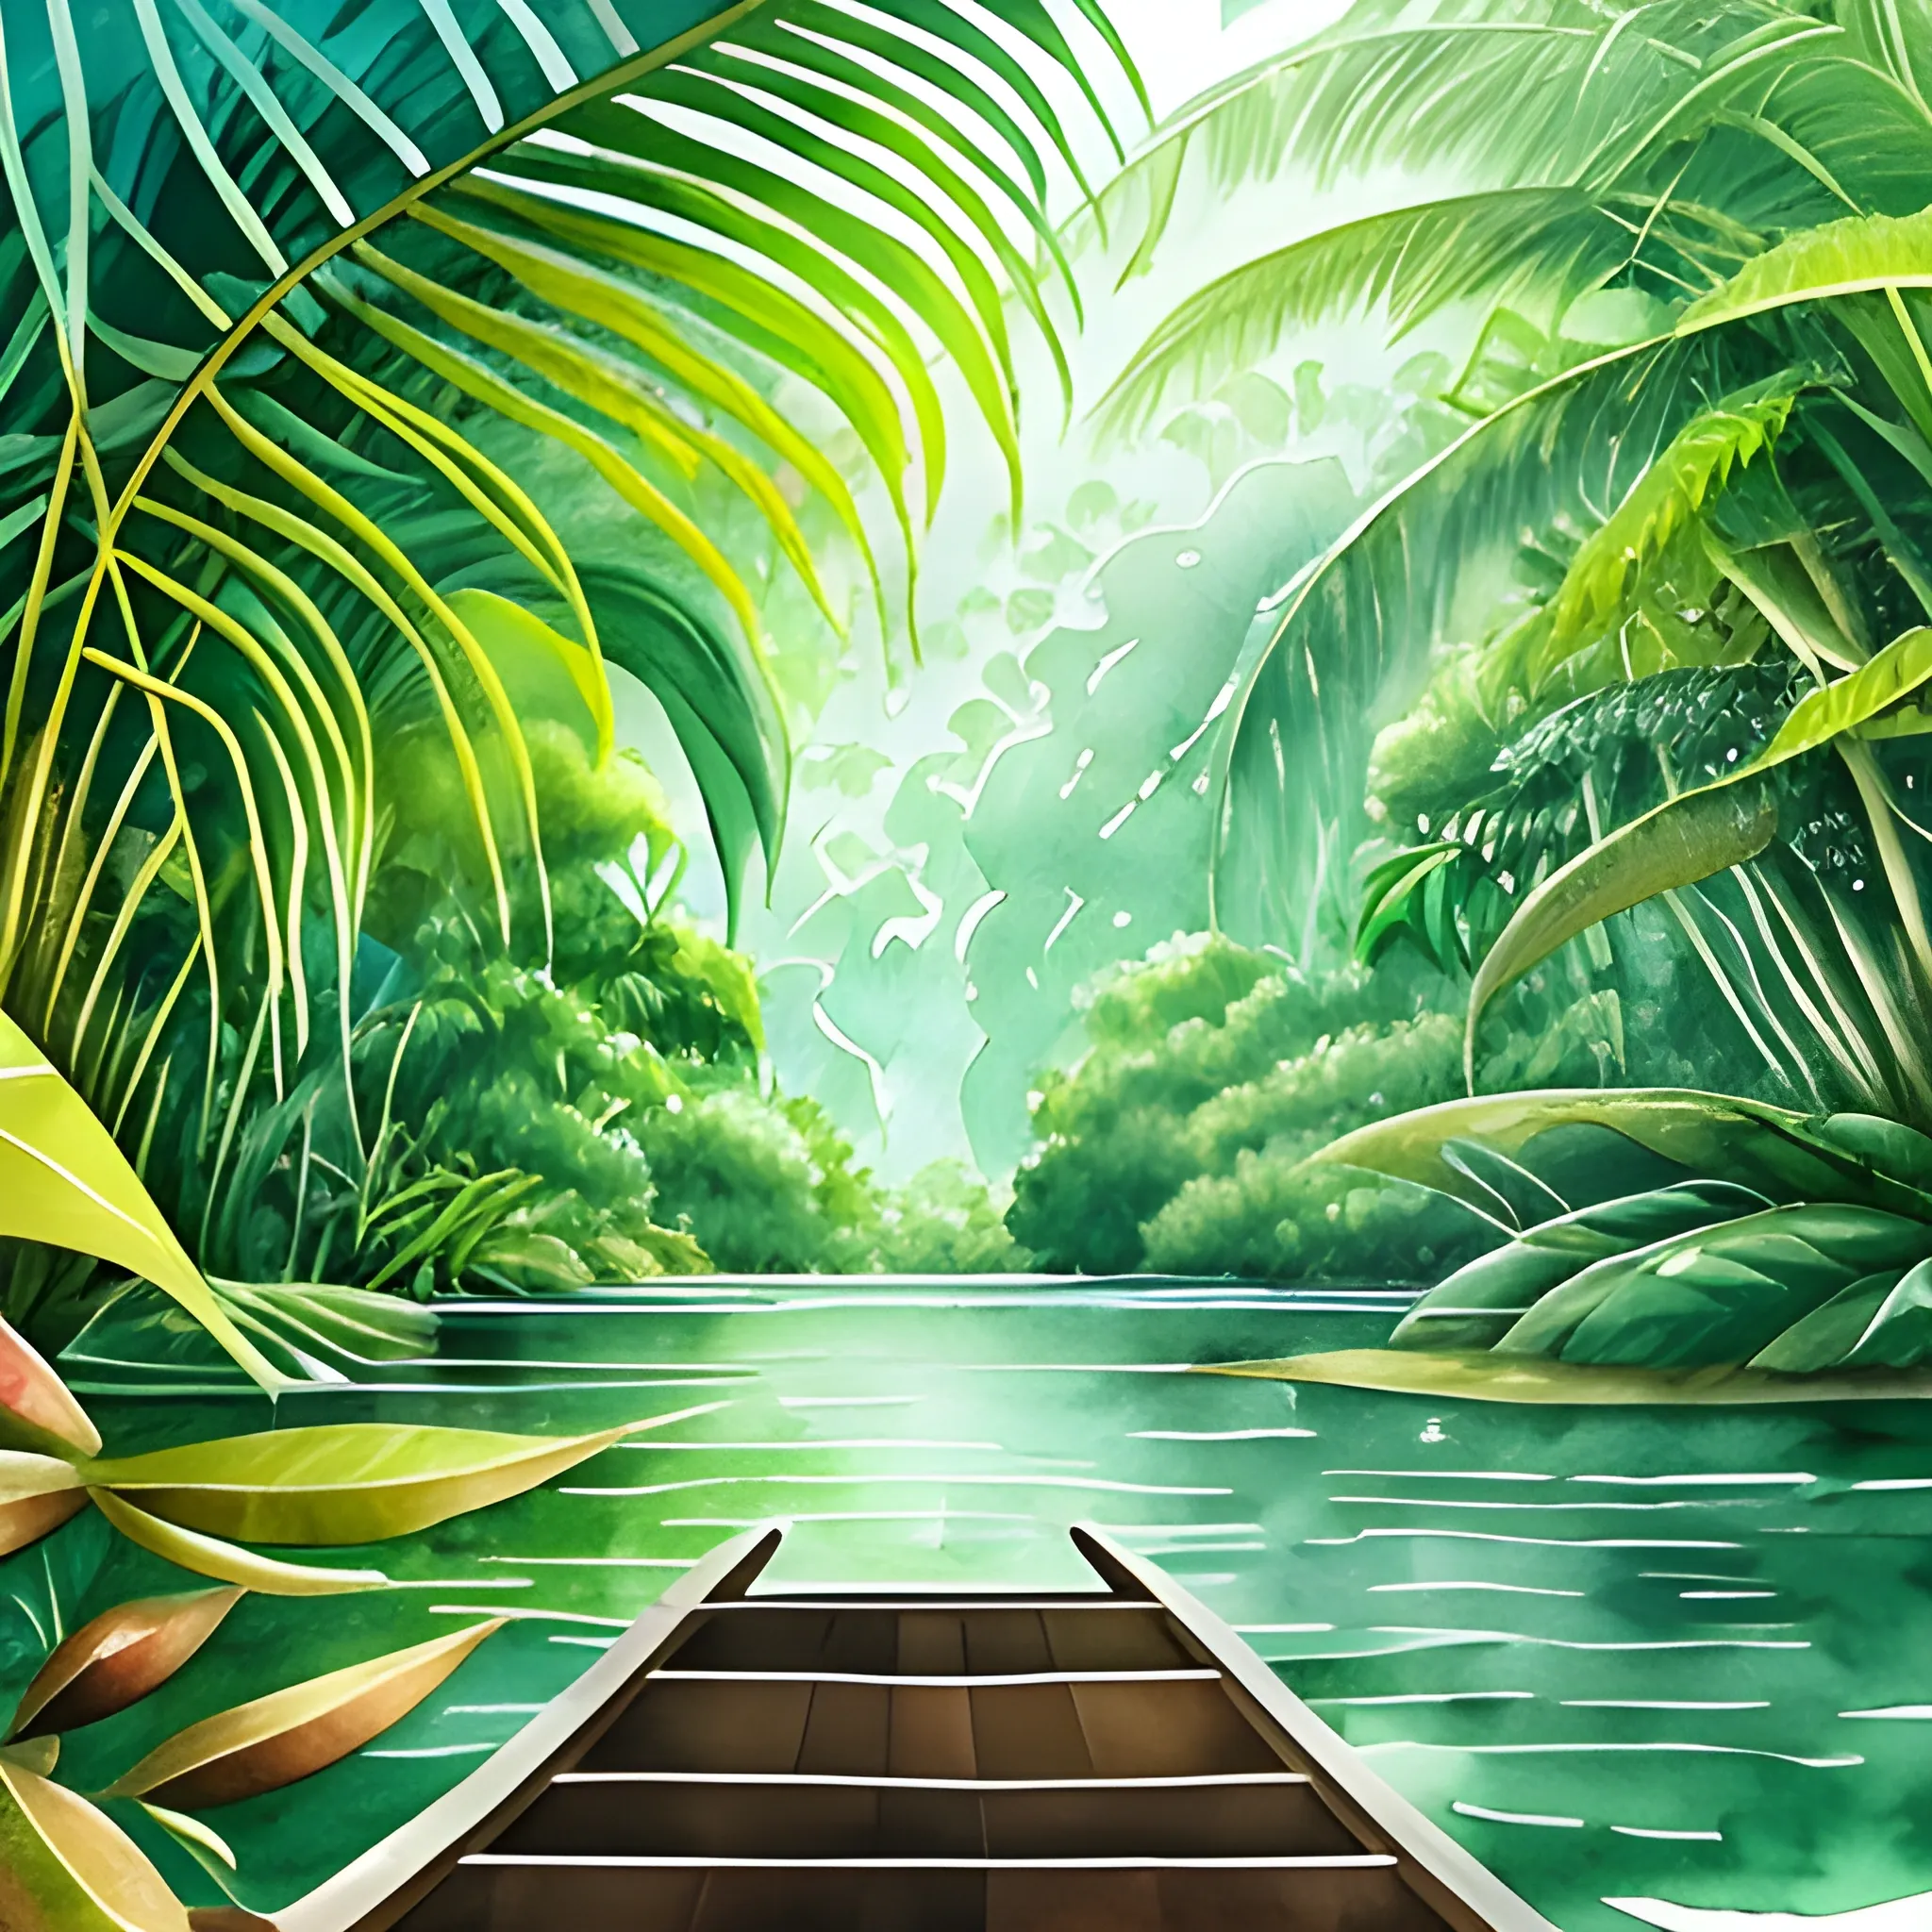 Imagine a serene and lush scene in the midst of a dense tropical jungle. From the front perspective of a small barge, capture the beauty of the river stretching out before you with simple and delicate watercolor strokes. The winding waters reflect the dappled sunlight filtering through the green canopy, creating a play of shadows and glimmers on the water's surface.

Incorporate details of the barge, with its weathered wood and some resting oars, using subtle strokes that highlight texture and simplicity. On the riverbanks, envision the lush jungle vegetation with towering trees, vines, and vibrant flowers, represented with soft strokes that convey the serenity of nature.

Ensure to include the rich color palette of the jungle, from the intense greens of the leaves to the warm tones of sunlight filtering through, using watercolor strokes to achieve a harmonious blend. May the composition, with its simple and watercolor strokes, invite viewers to immerse themselves in the wonder of untouched nature and adventure in the midst of this mysterious jungle!